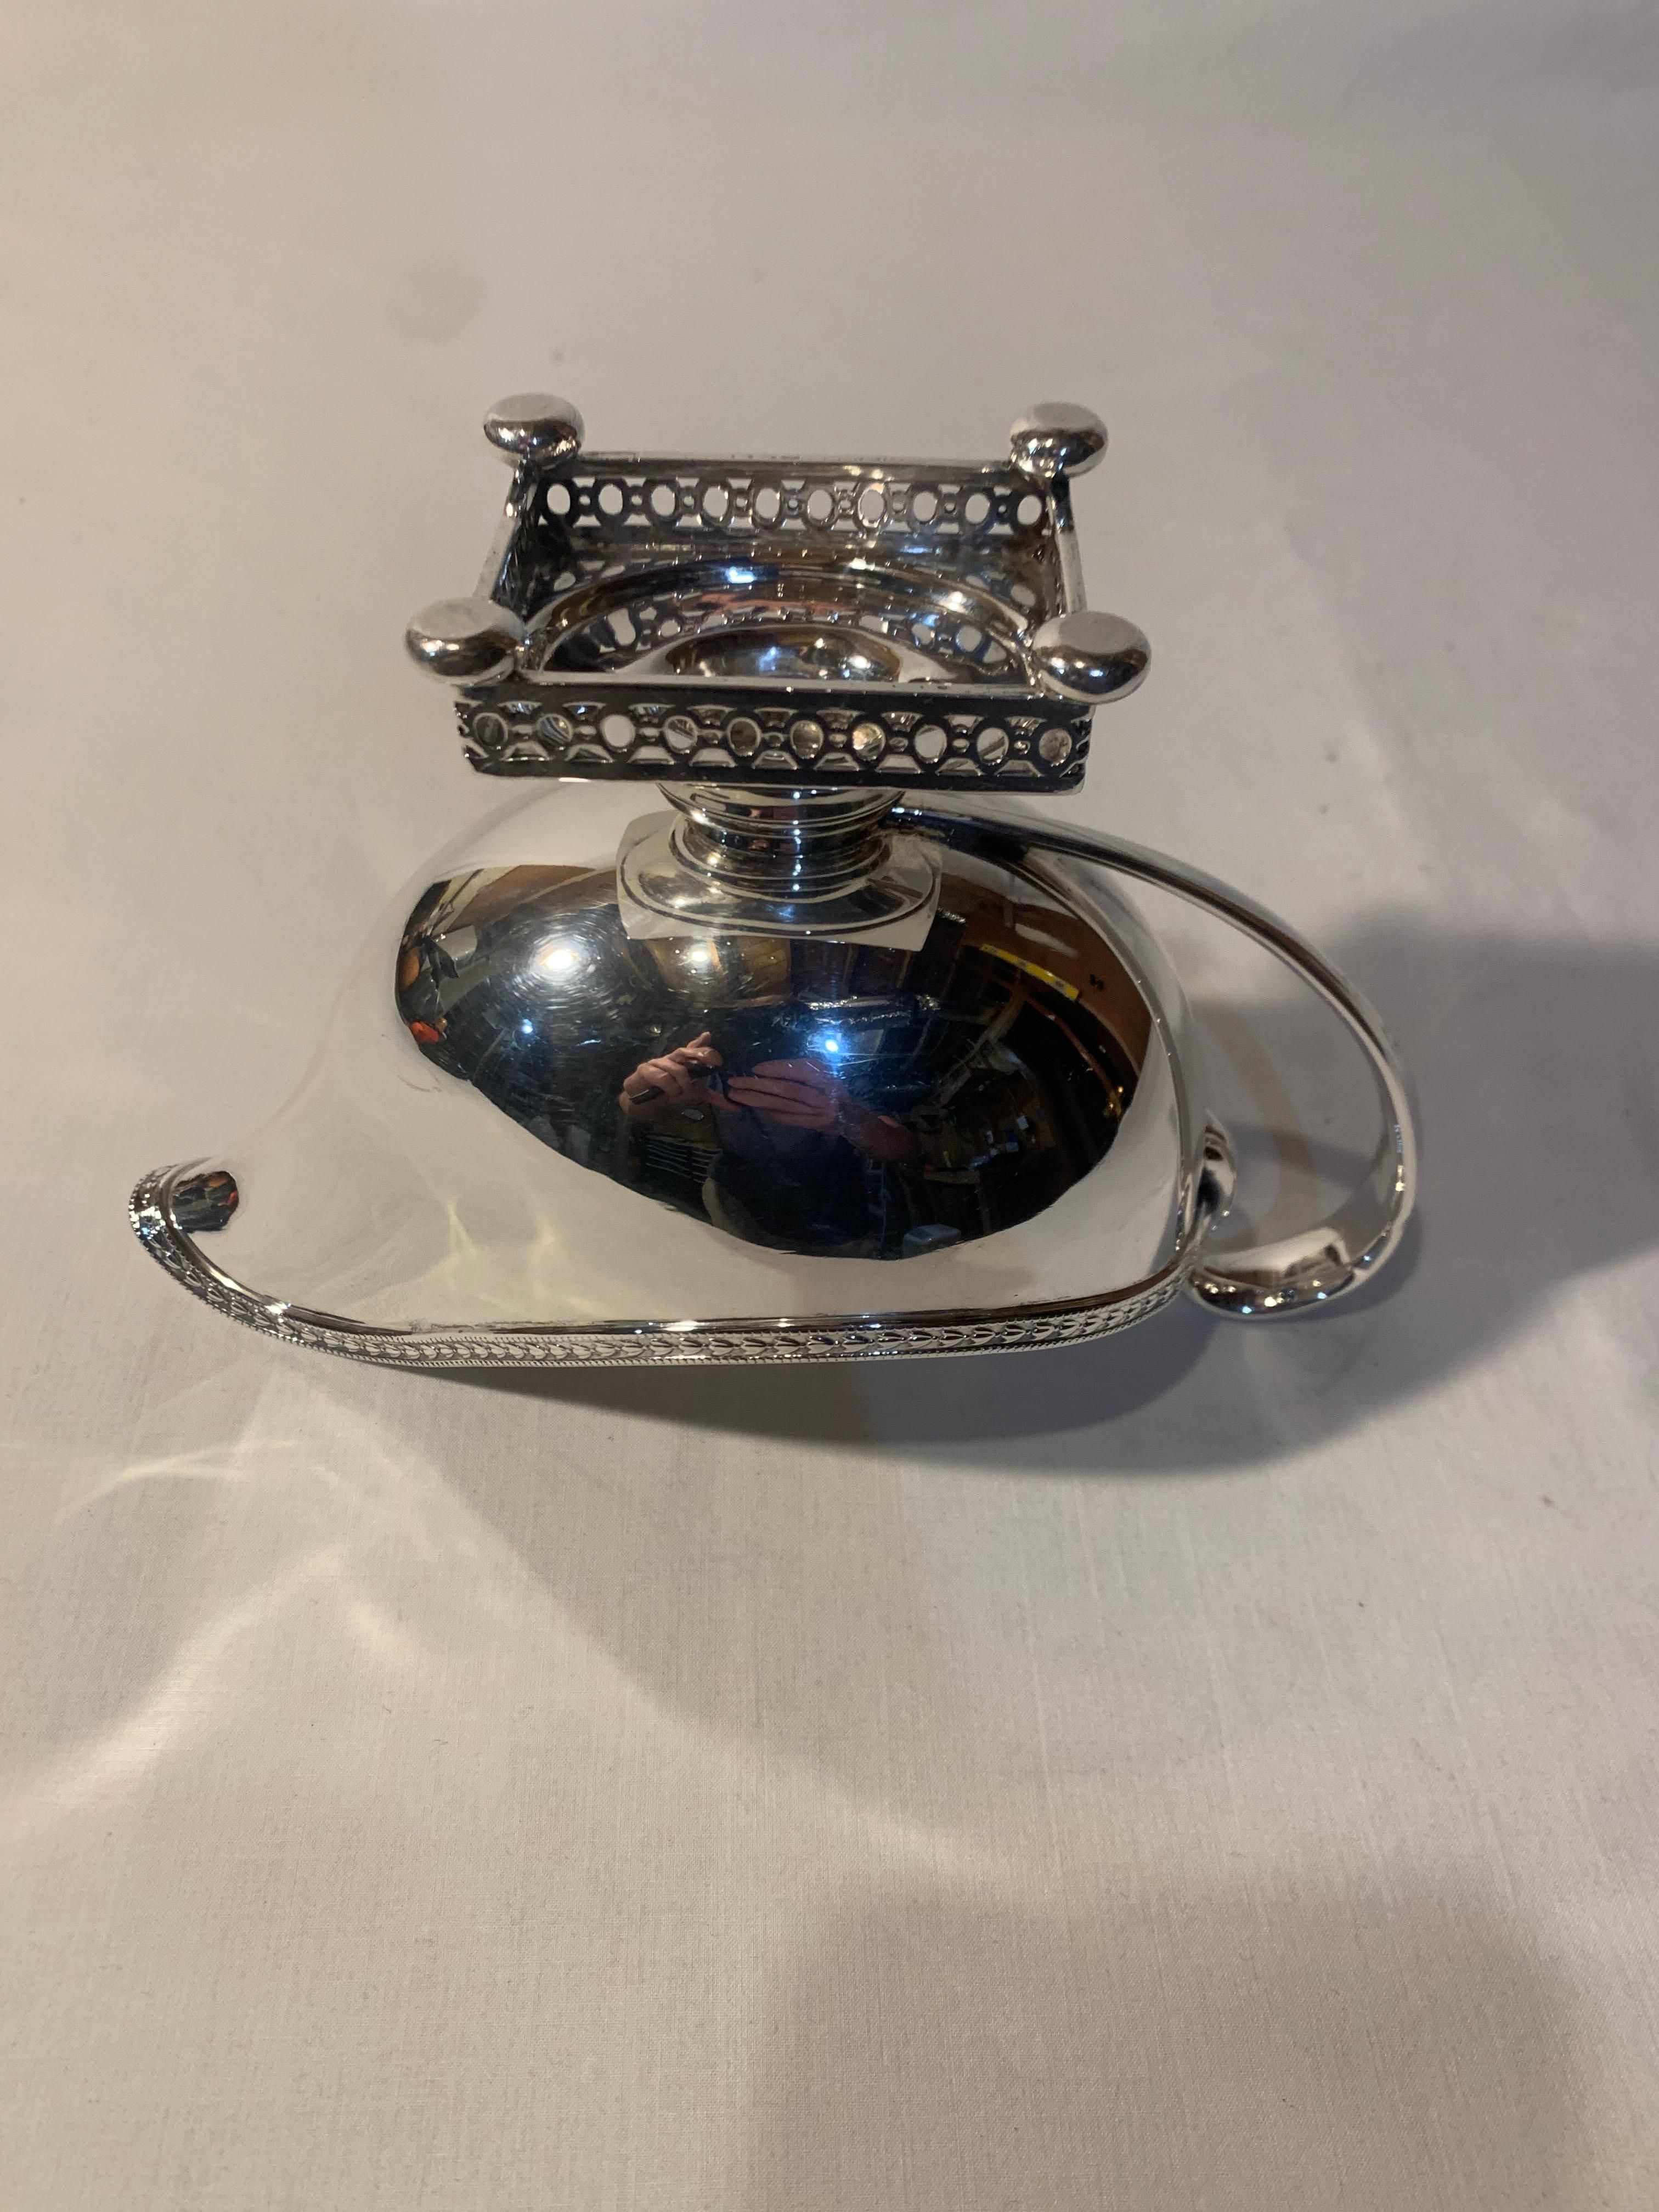 This is a beautiful and unique Gorham Sterling Silver Gravy boat is in pristine condition. It stands 5 inches in height, is 8 inches long and is 3.5 inches in width. The Hallmarks on the bottom indicate its from 1894. 10 troy ounces.